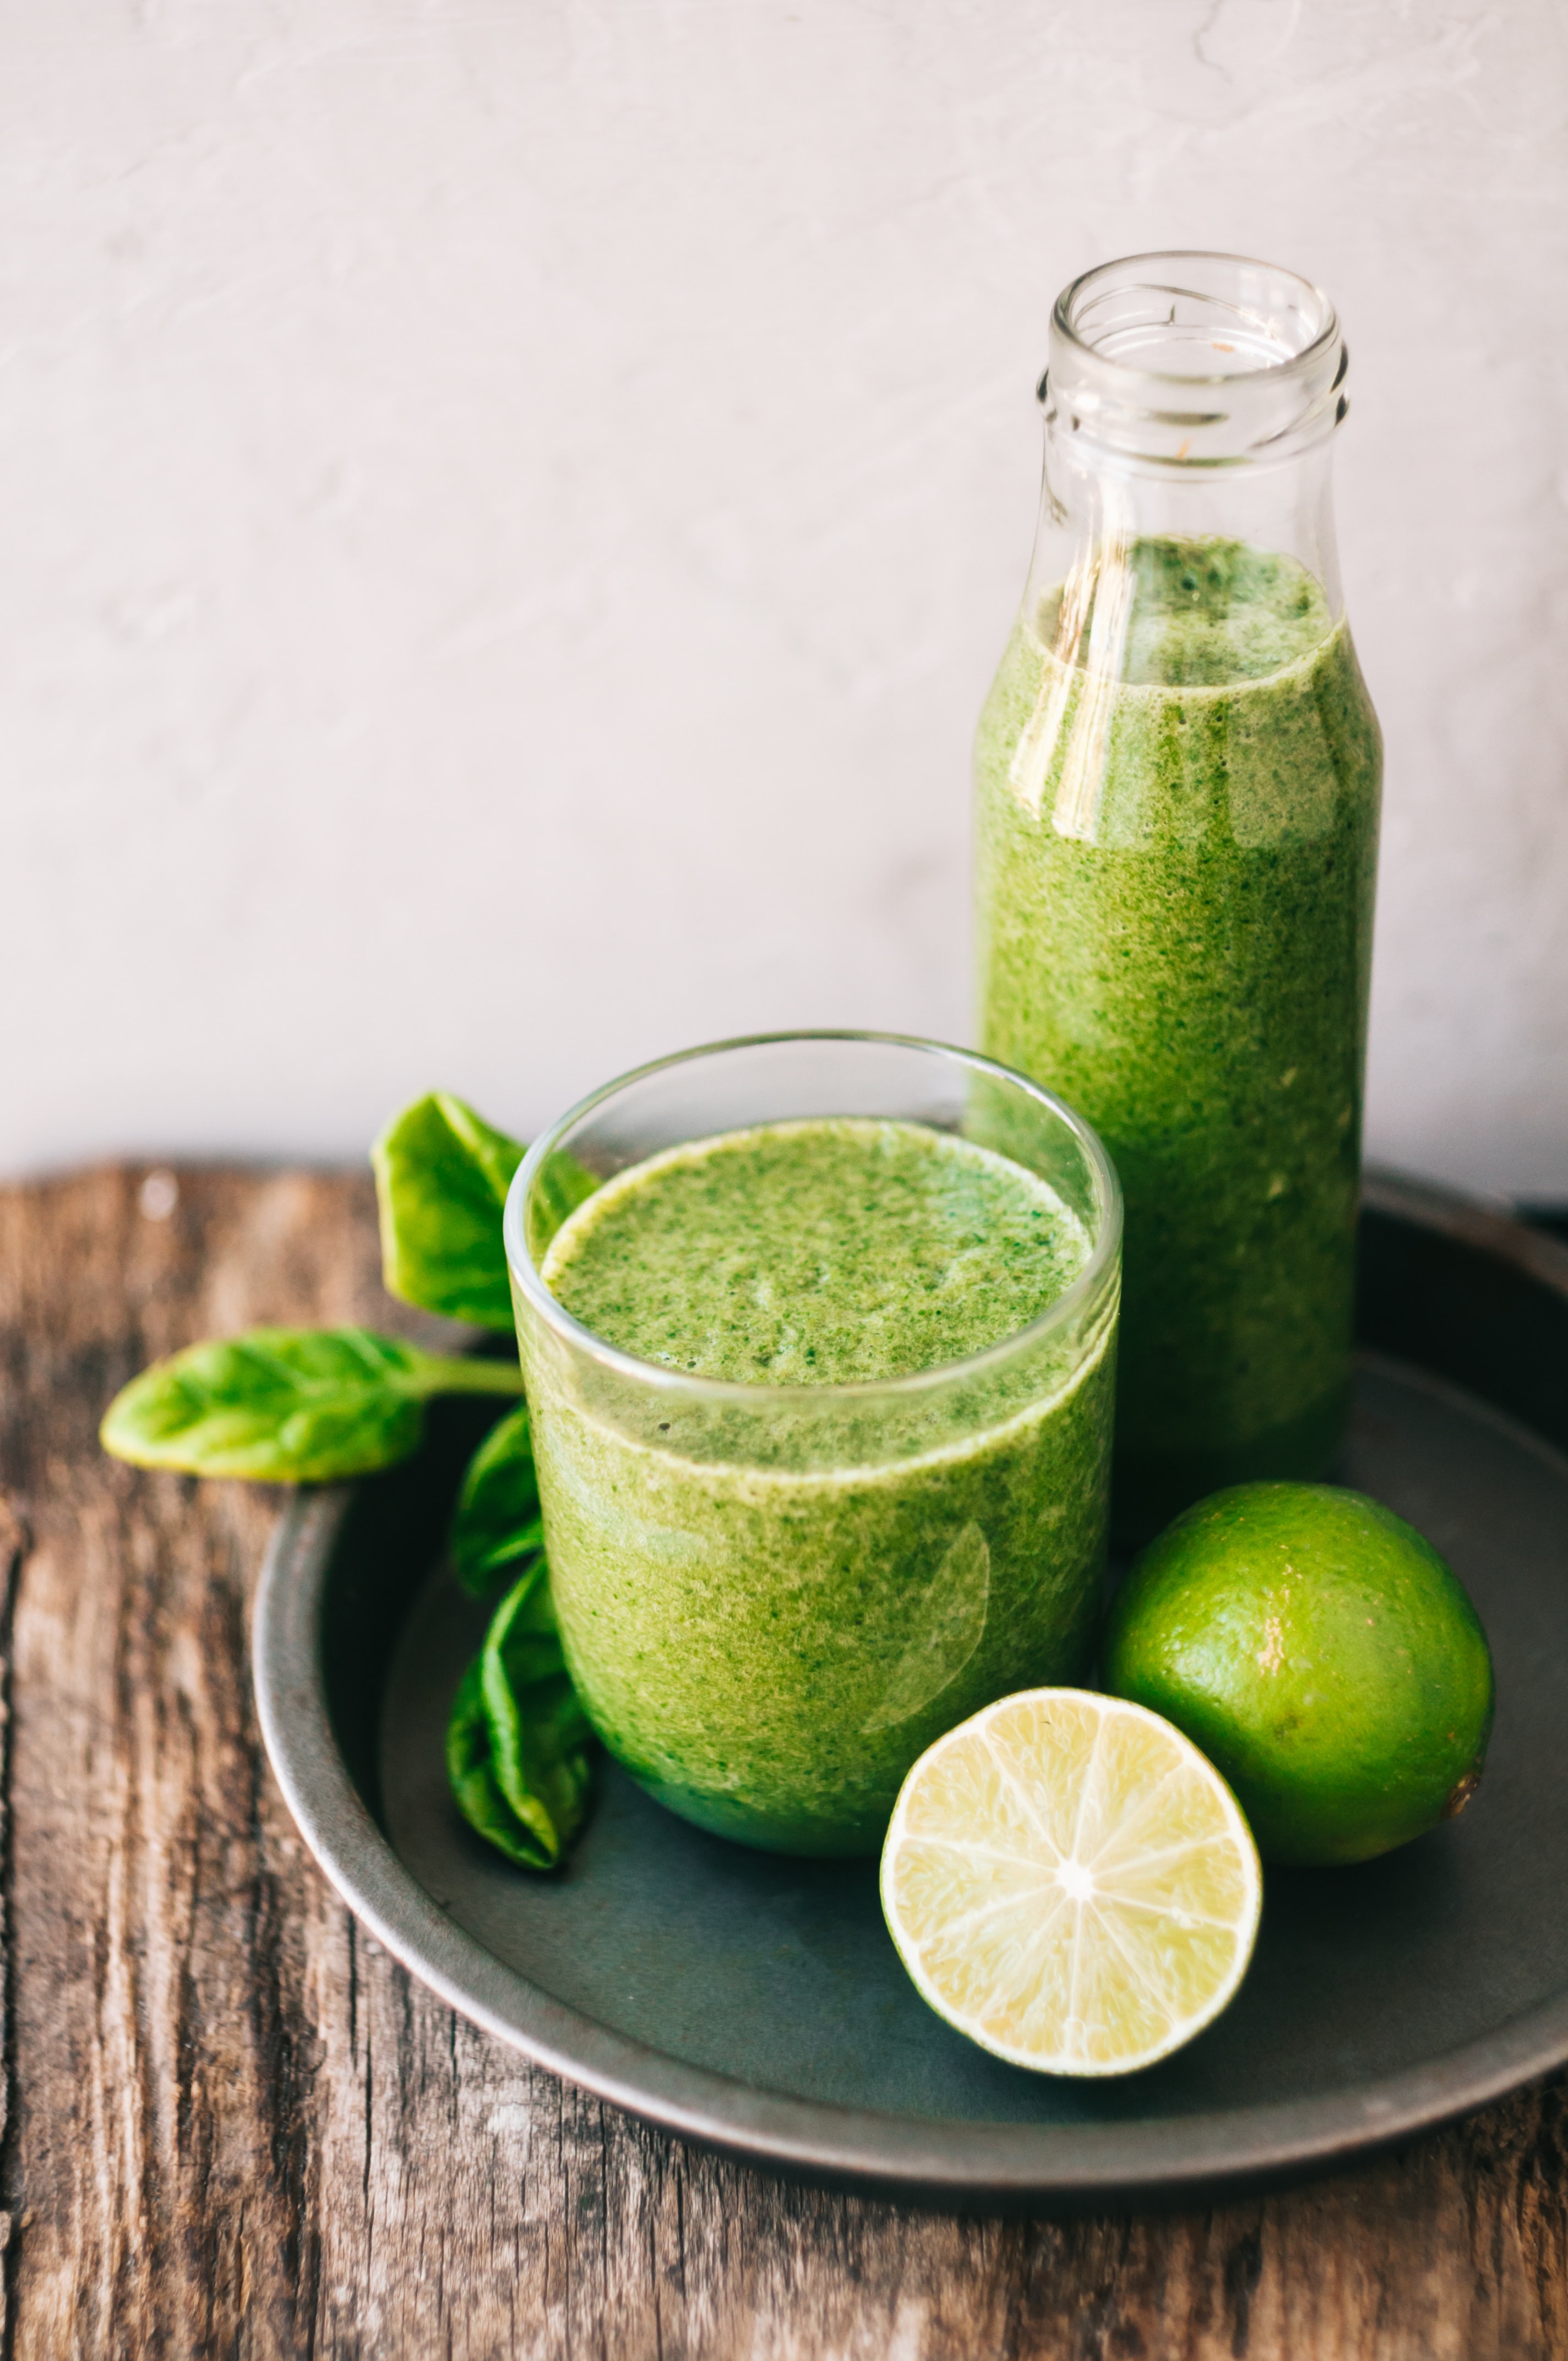 green barley juice with limes